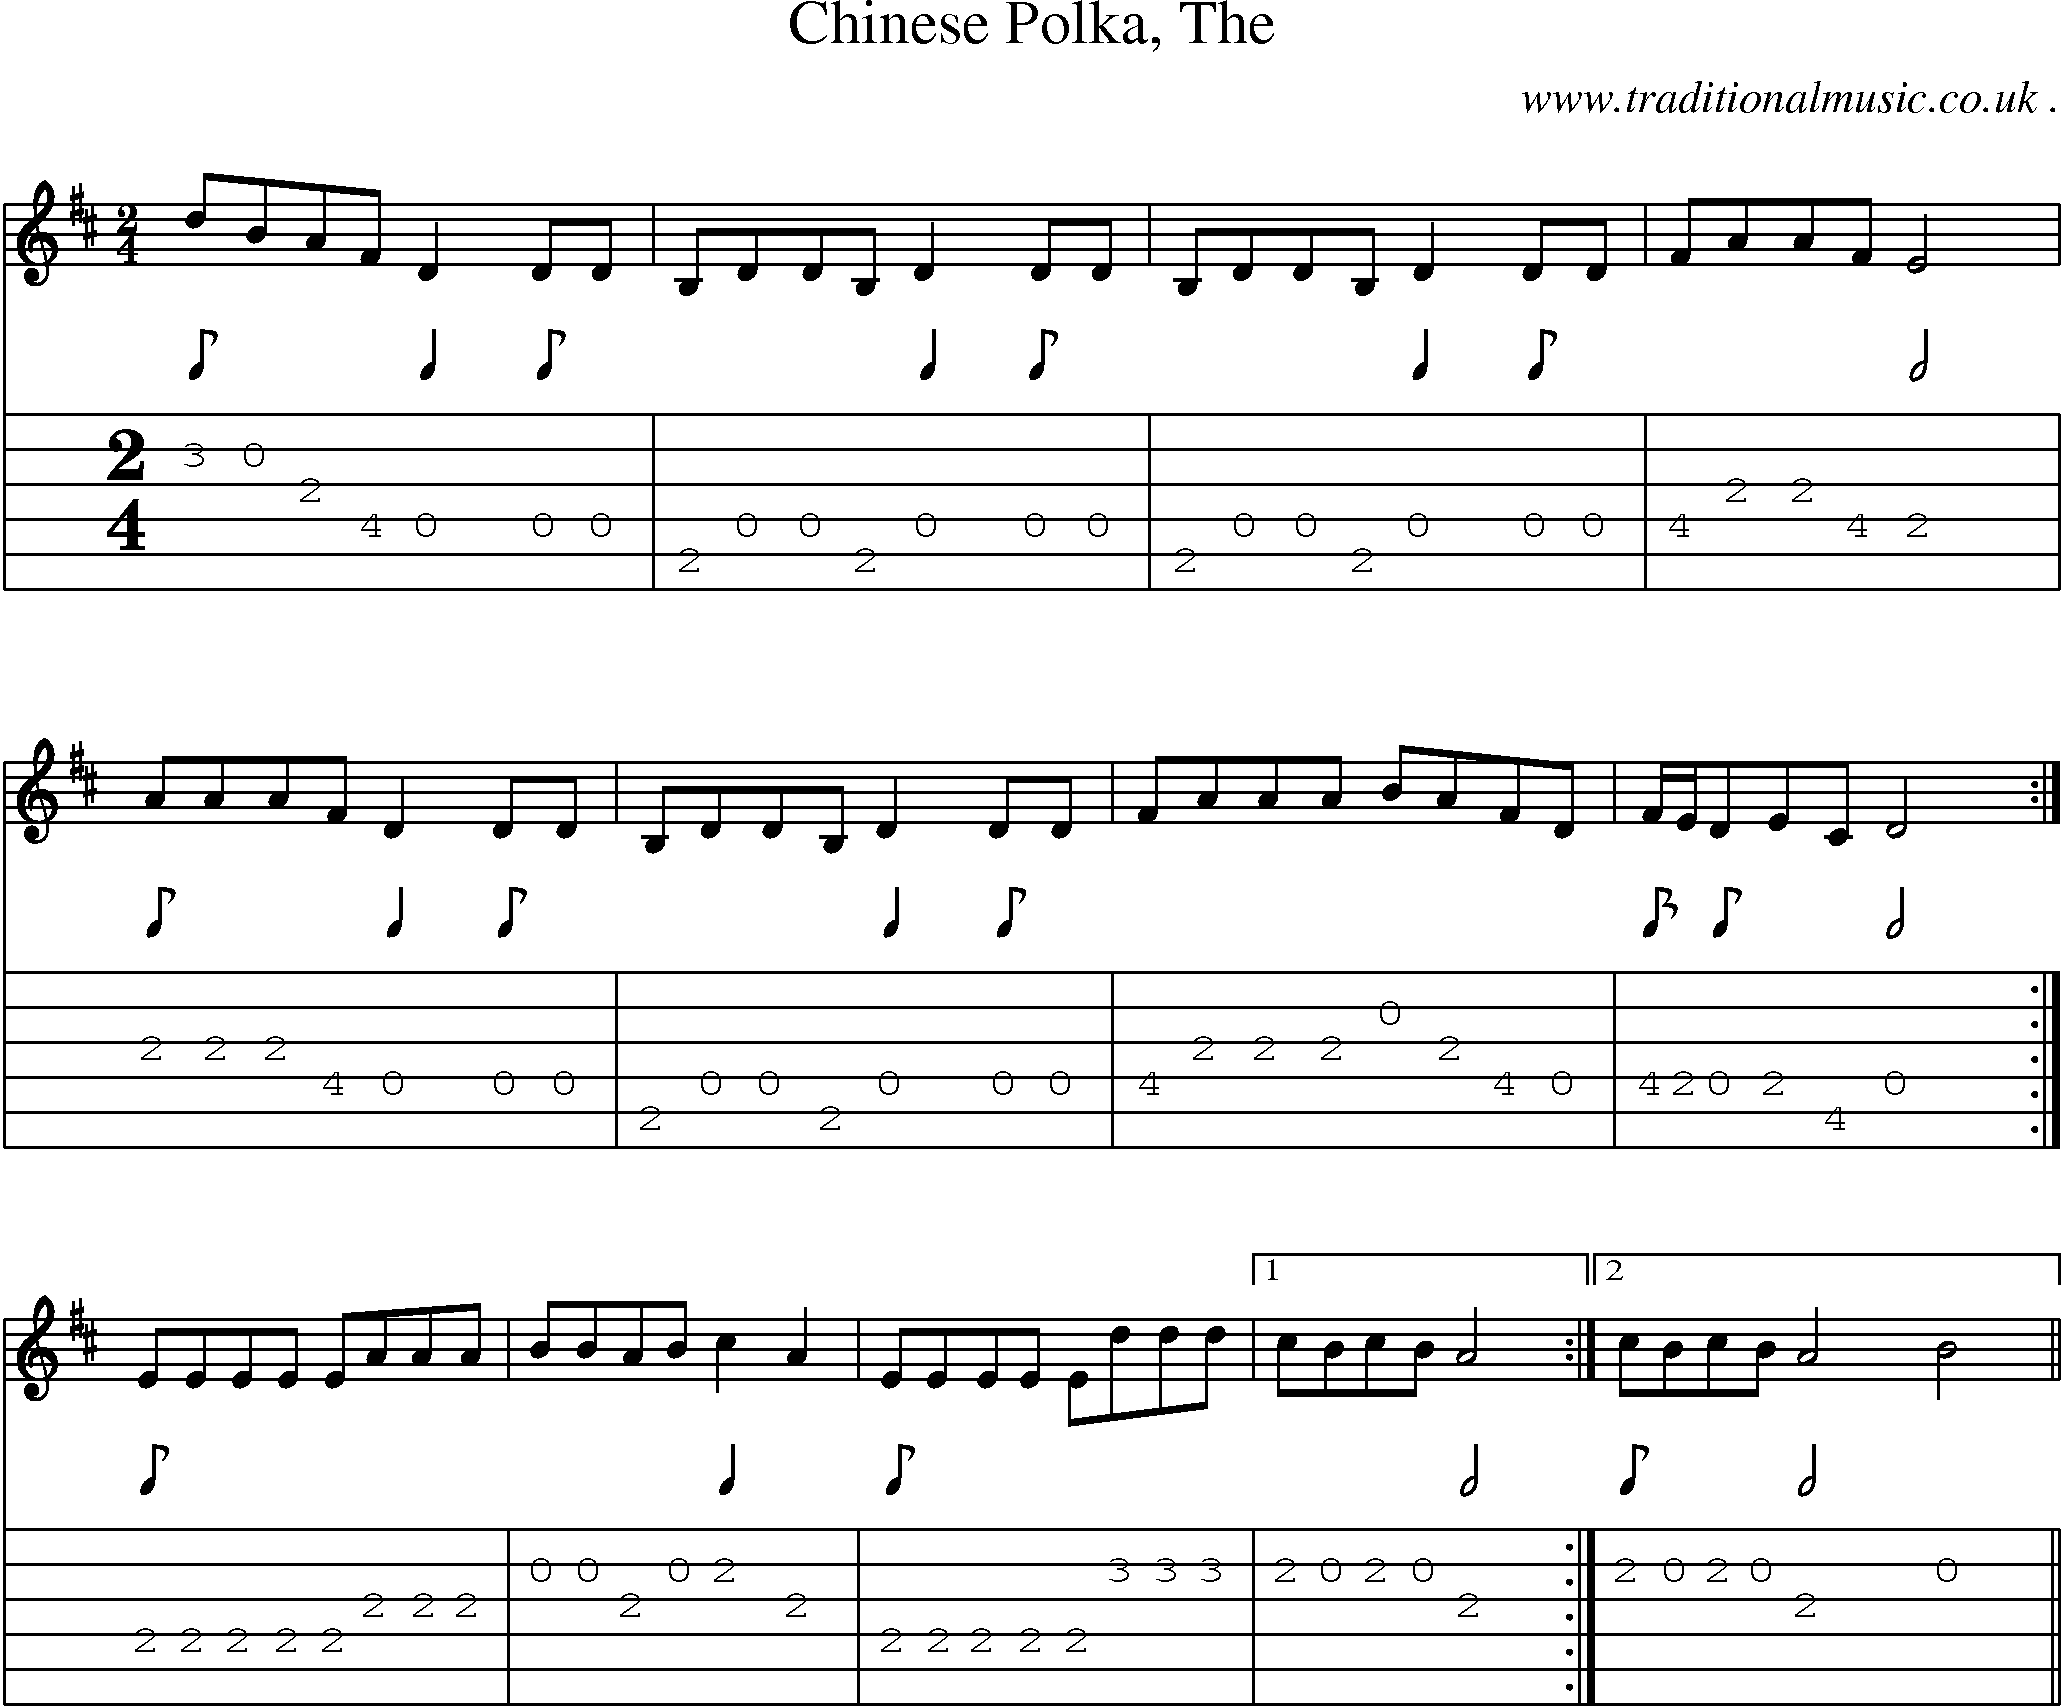 Music Score and Guitar Tabs for Chinese Polka